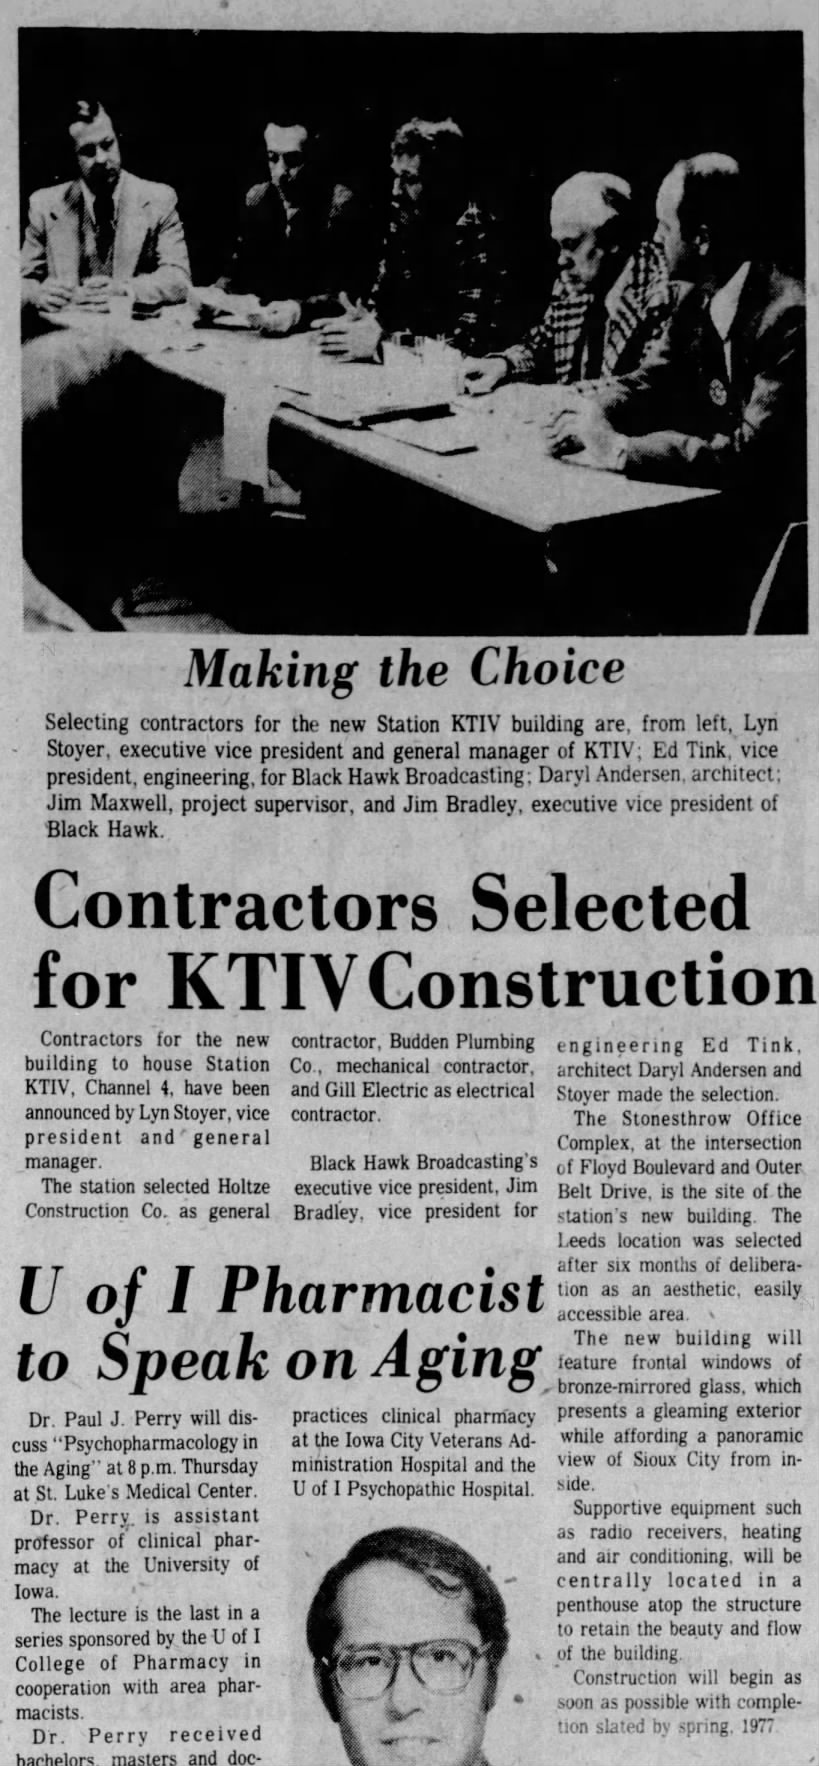 Contractors Selected for KTIV Construction